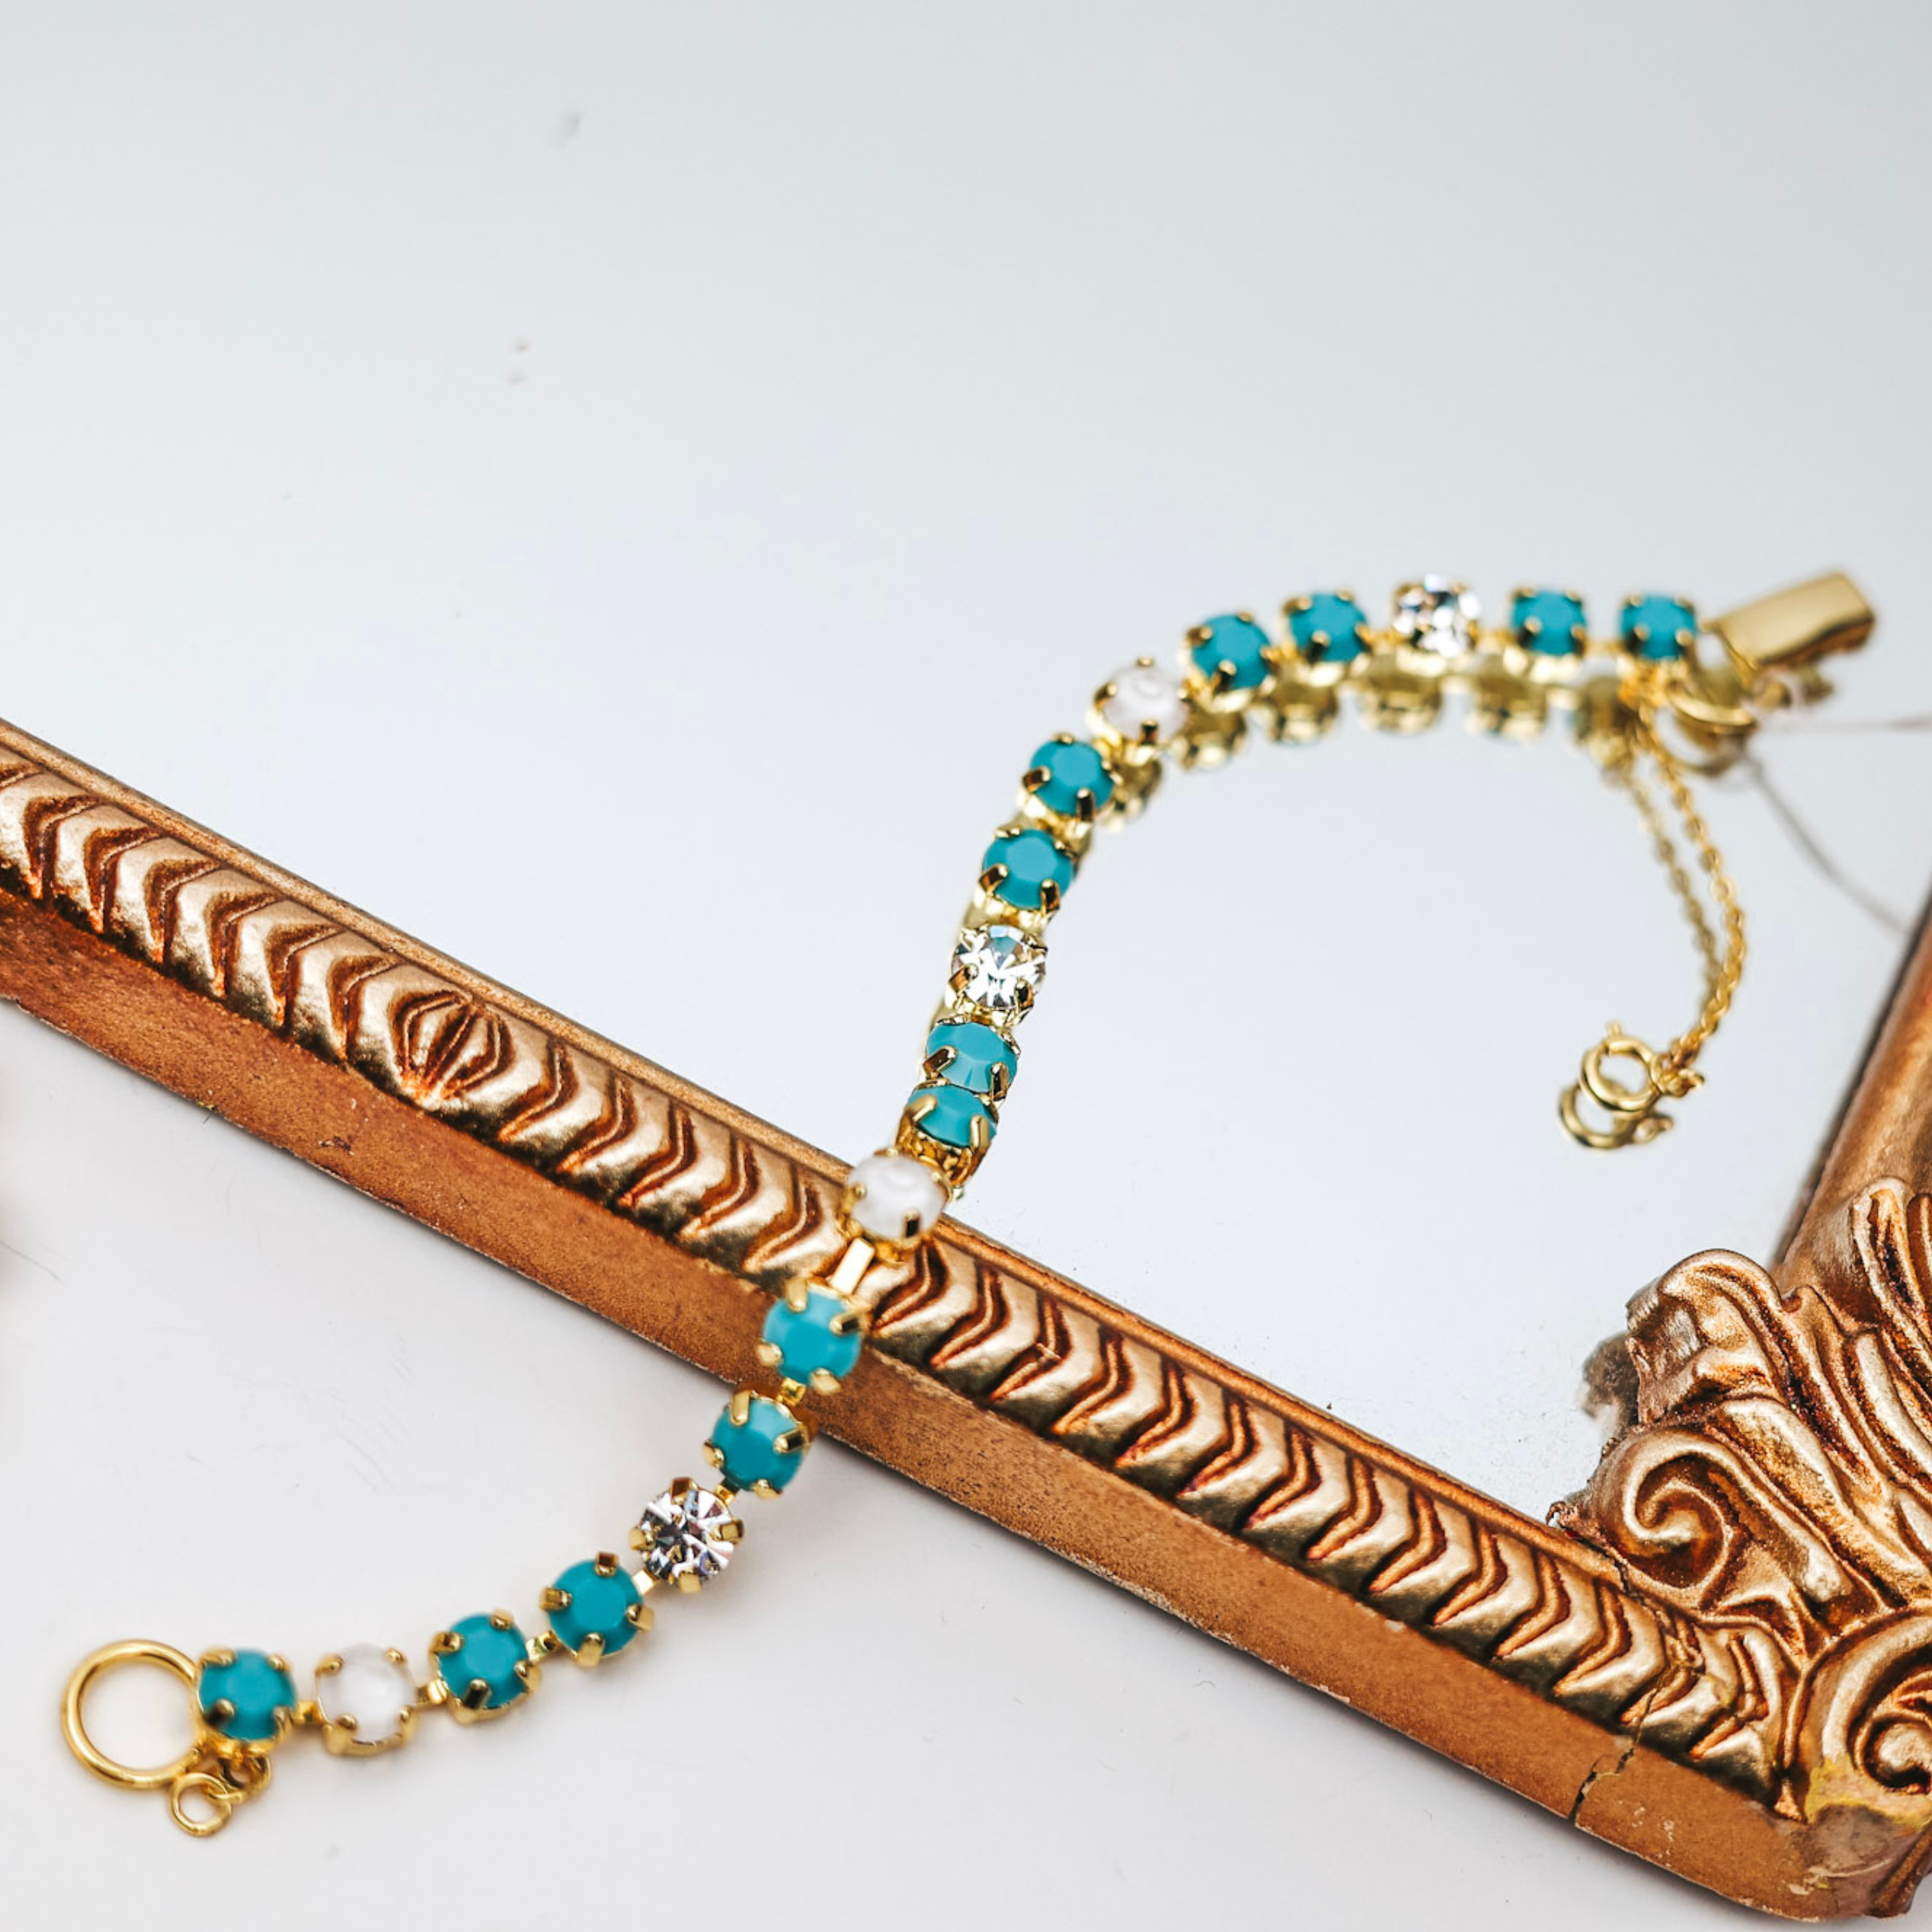 A gold-tone bracelet with a mix of ivory, clear, and turquoise crystals along the bracelet. Pictured on a white background with a gold mirror.